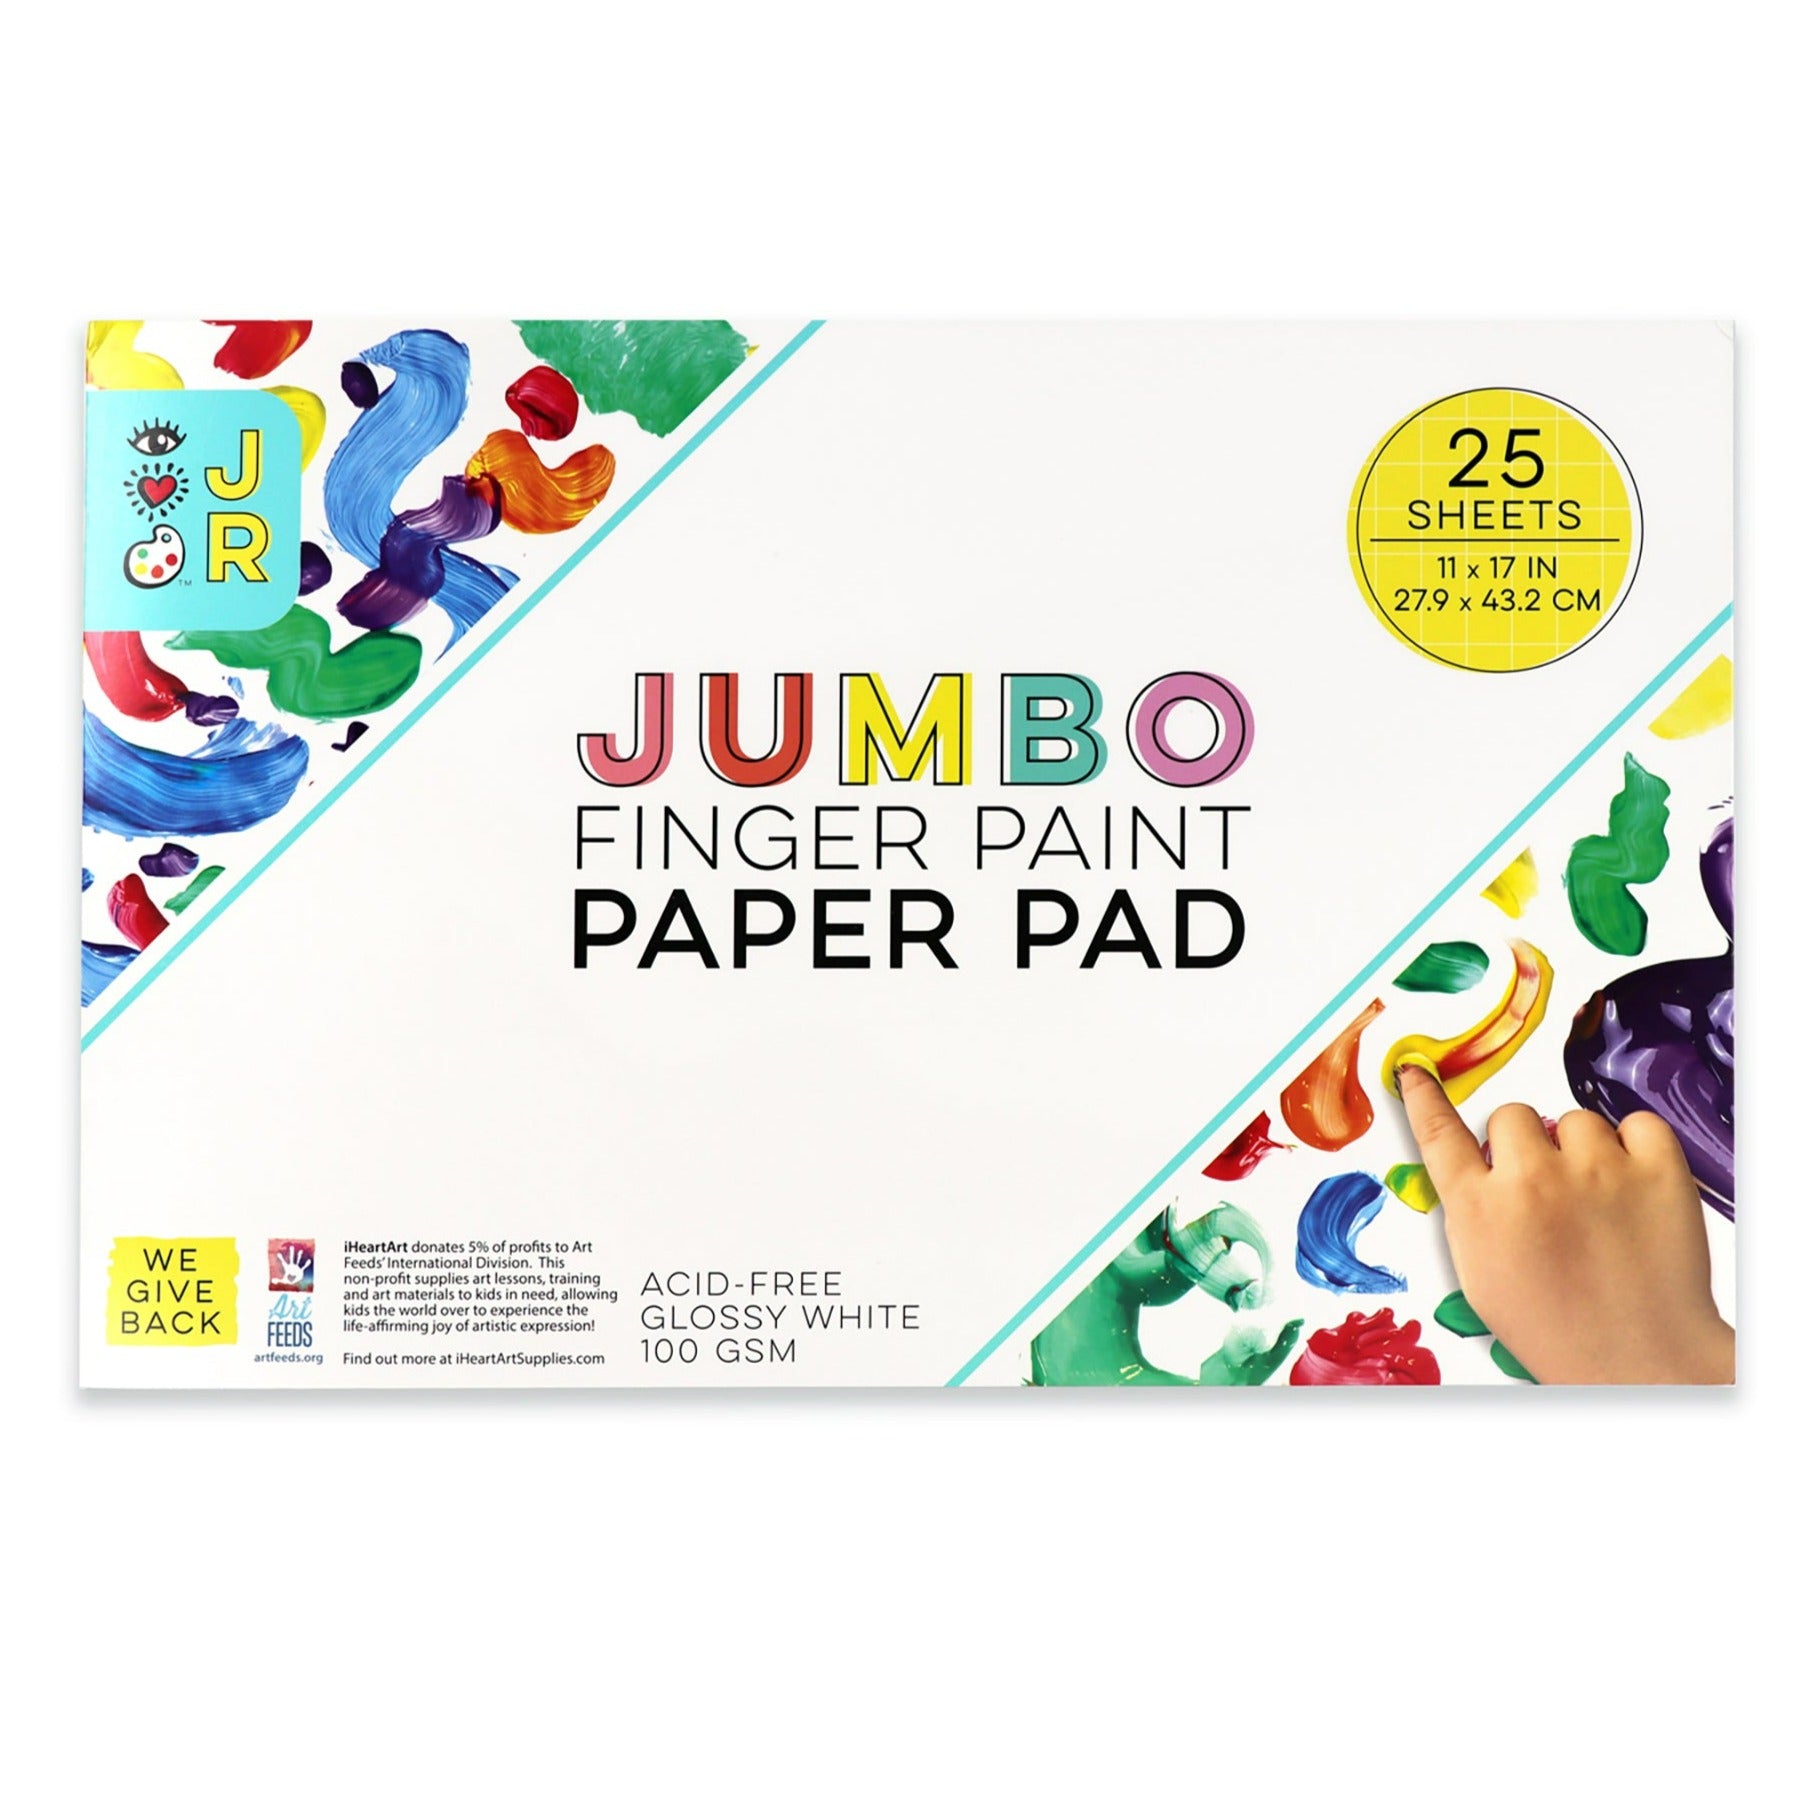 U.S. Art Supply Large (Pack of 2 Pads) 11 x 17 Finger Painting Paper Pad - 25 Sheets 60lb (100gsm) Acid Free